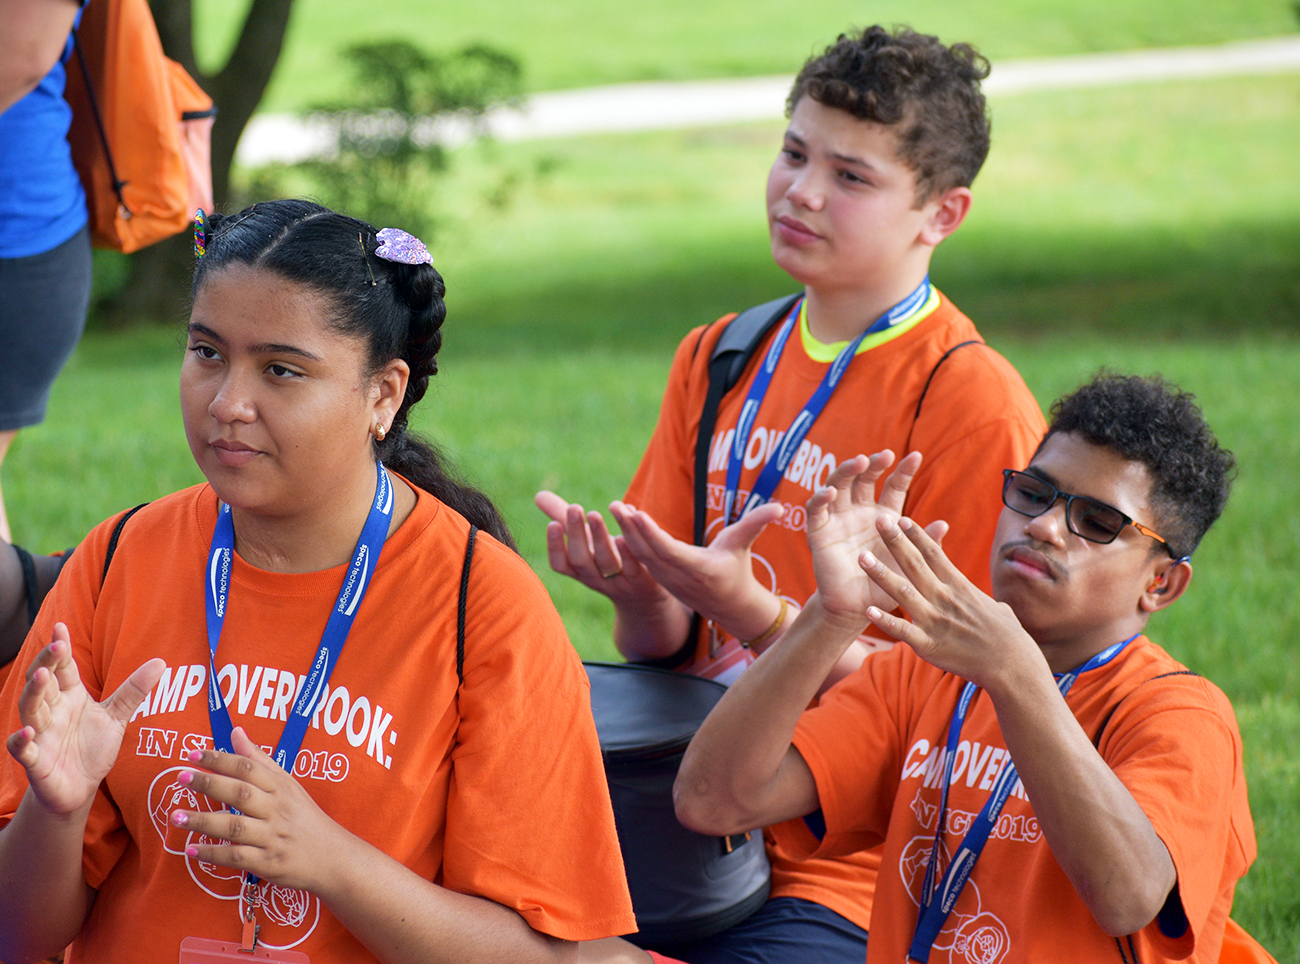 Deaf children enjoy inspirational Camp Overbrook: In Sign – Catholic Philly1300 x 964